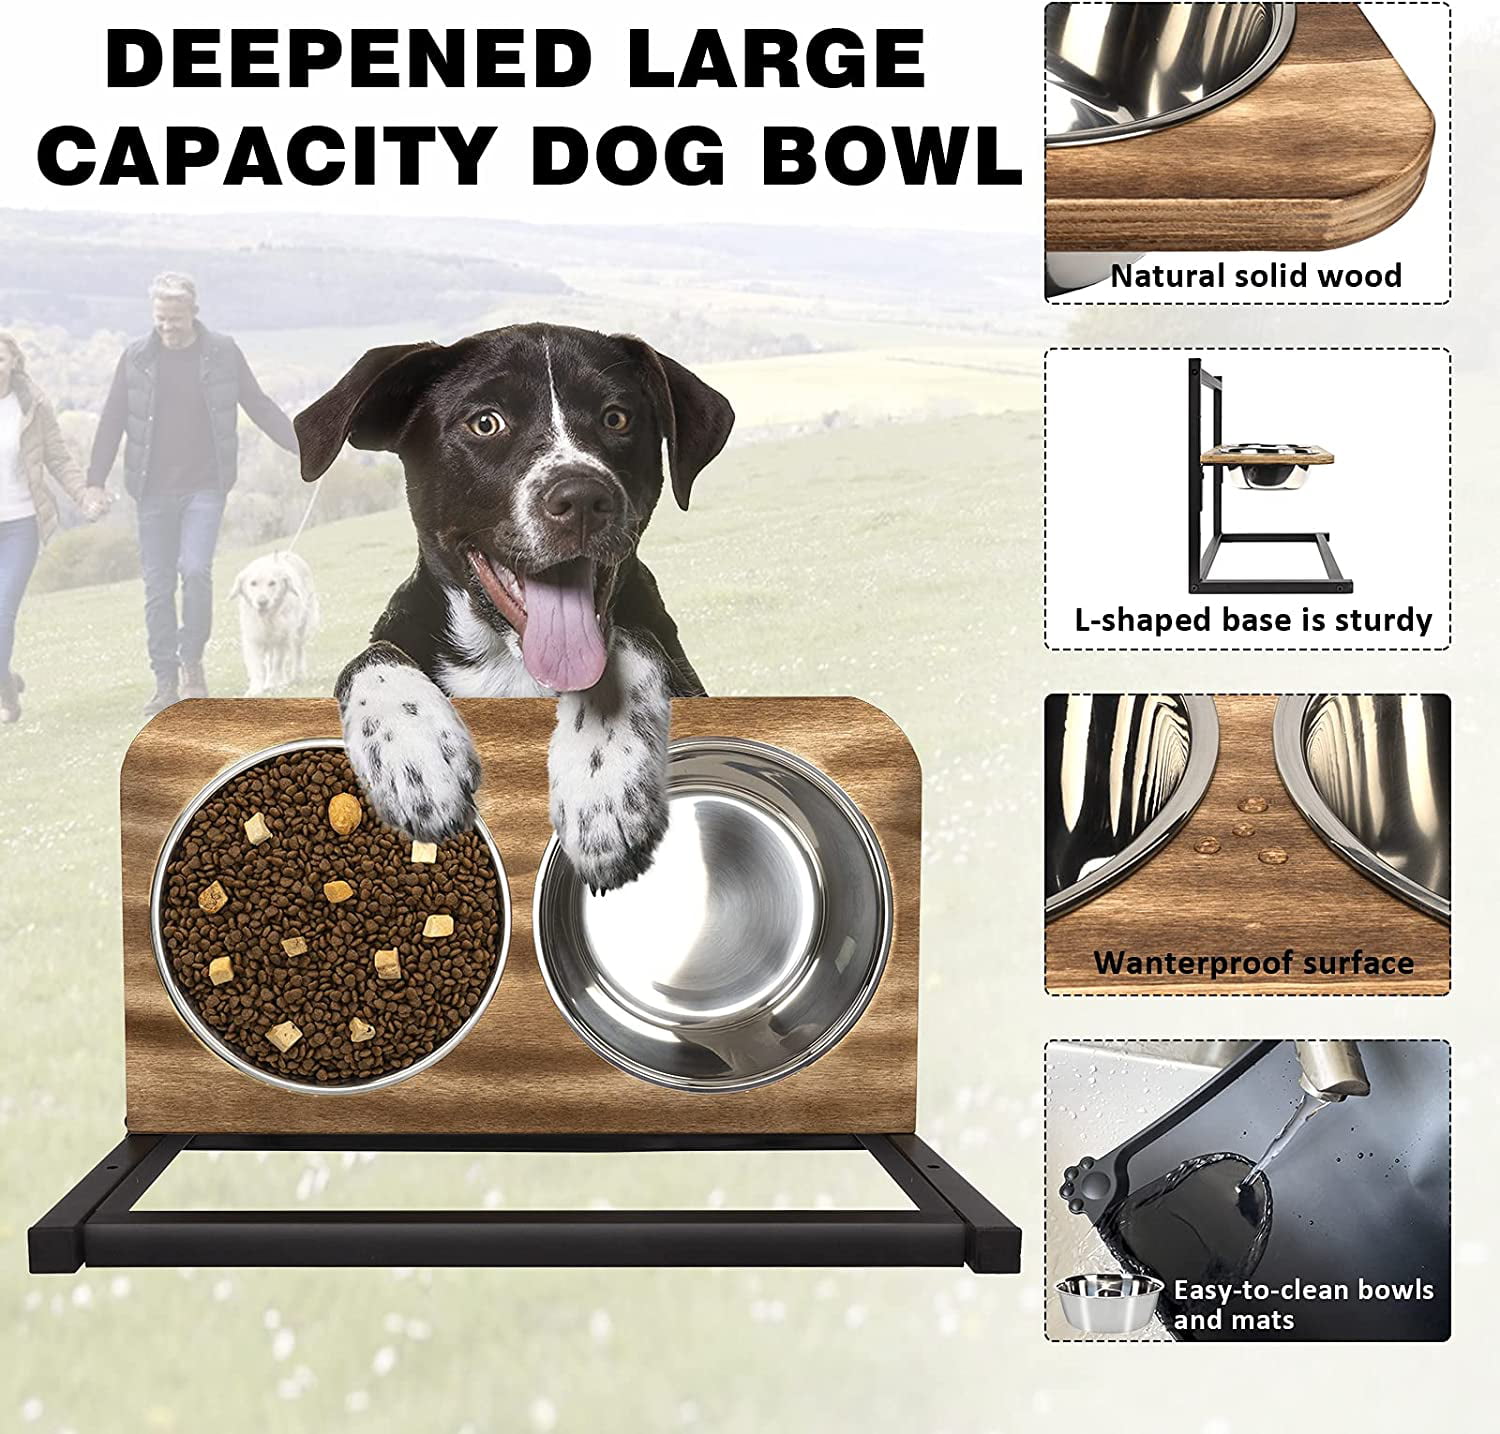 Adjustable Height Raised Dog Bowls With Slow Feeder And Standing Feature  Perfect For Elevated Dog Food Stand And Table 2 In 1 Food And Water Bowl  231023 From Jia10, $23.89